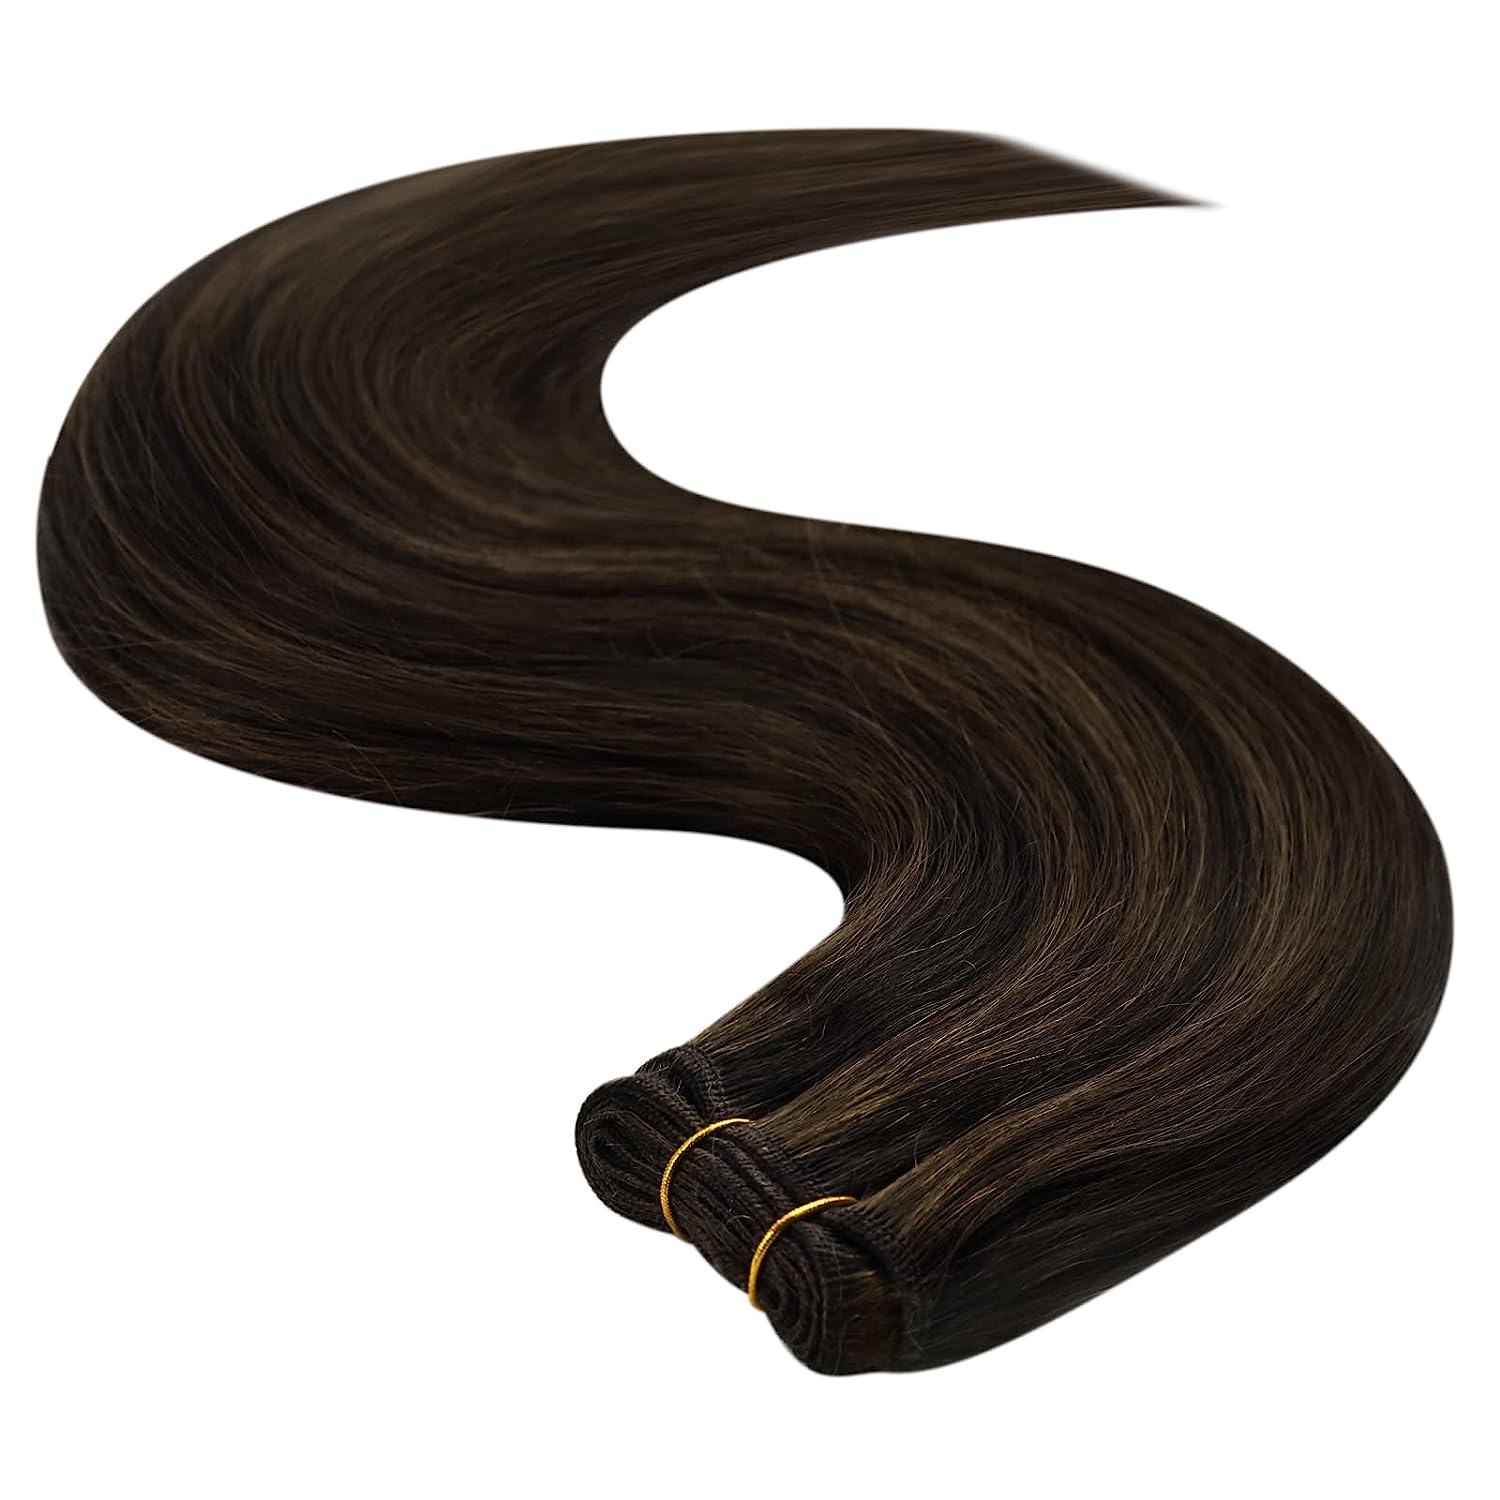 Remy Hair Weft Extensions Human Hair Bundles